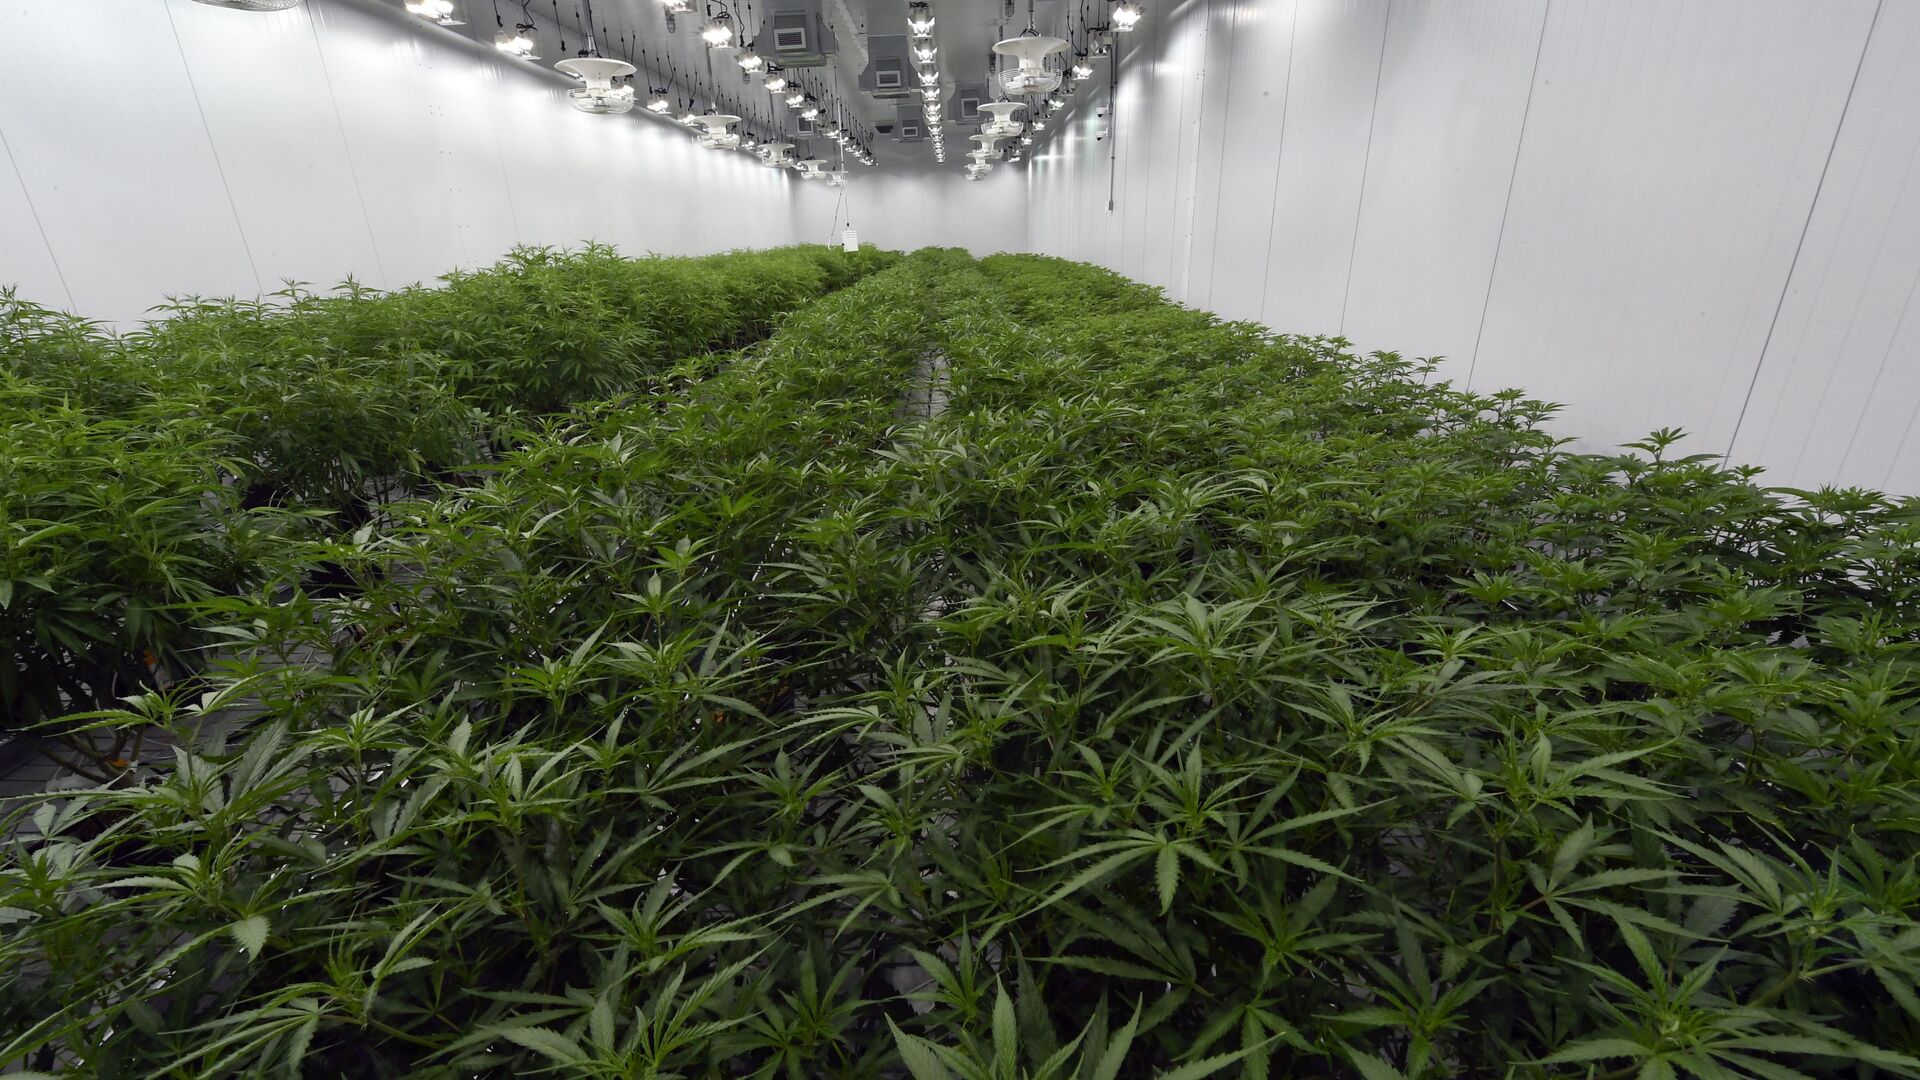 This Aug. 22, 2019 photo shows medical marijuana plants being grown before flowering during a media tour of the Curaleaf medical cannabis cultivation and processing facility in Ravena, N.Y. - Sputnik International, 1920, 01.04.2022